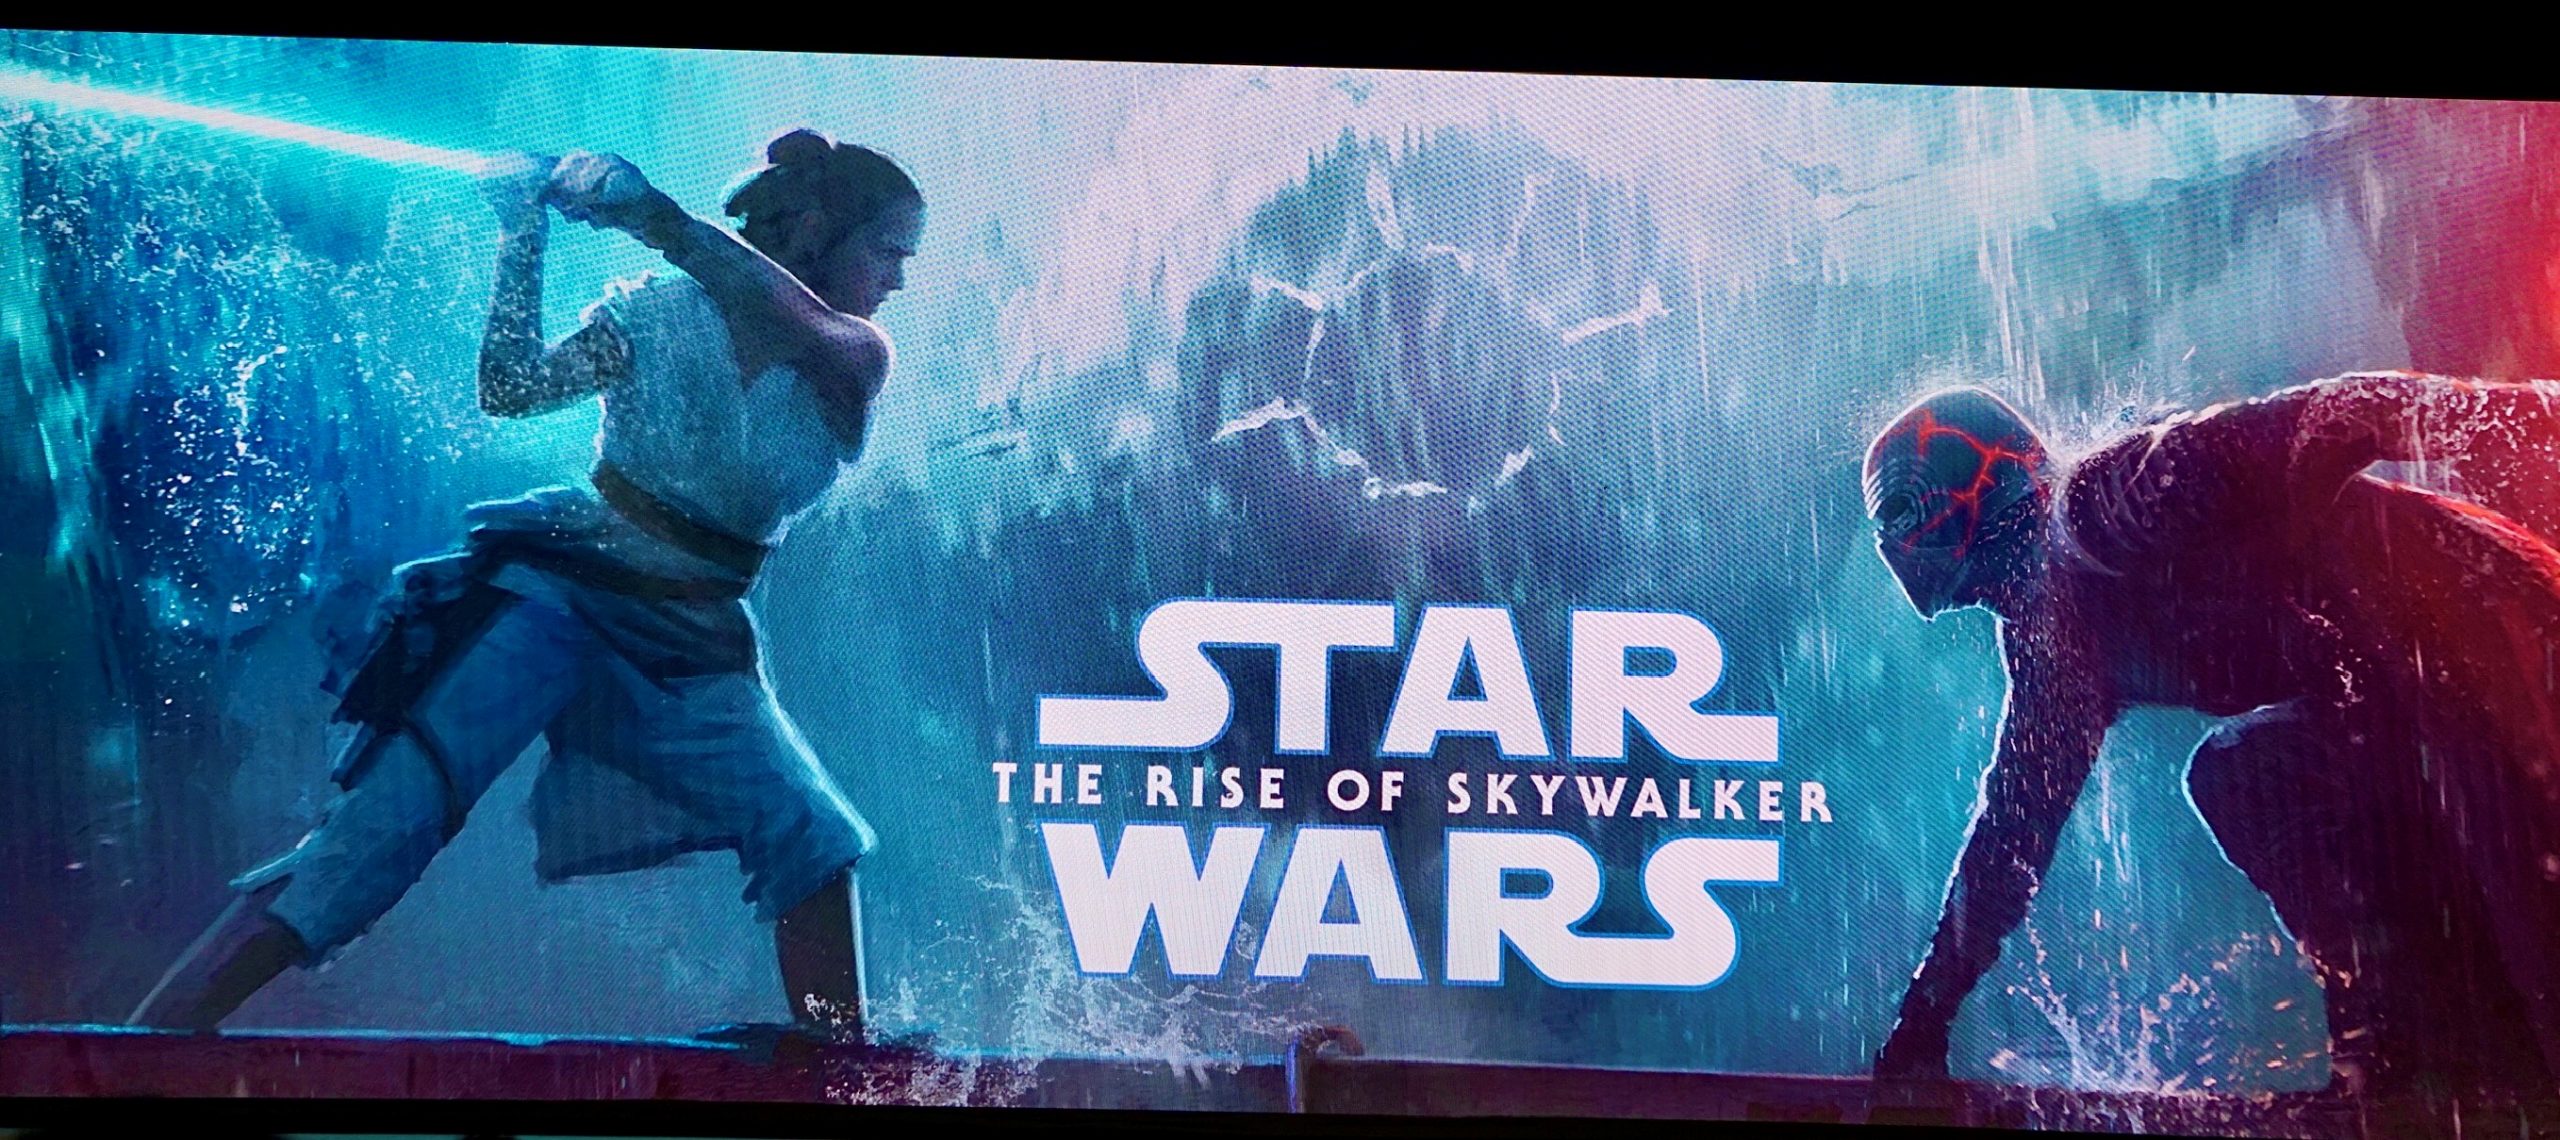 Spoiler Free Review: Star Wars- The Rise of Skywalker